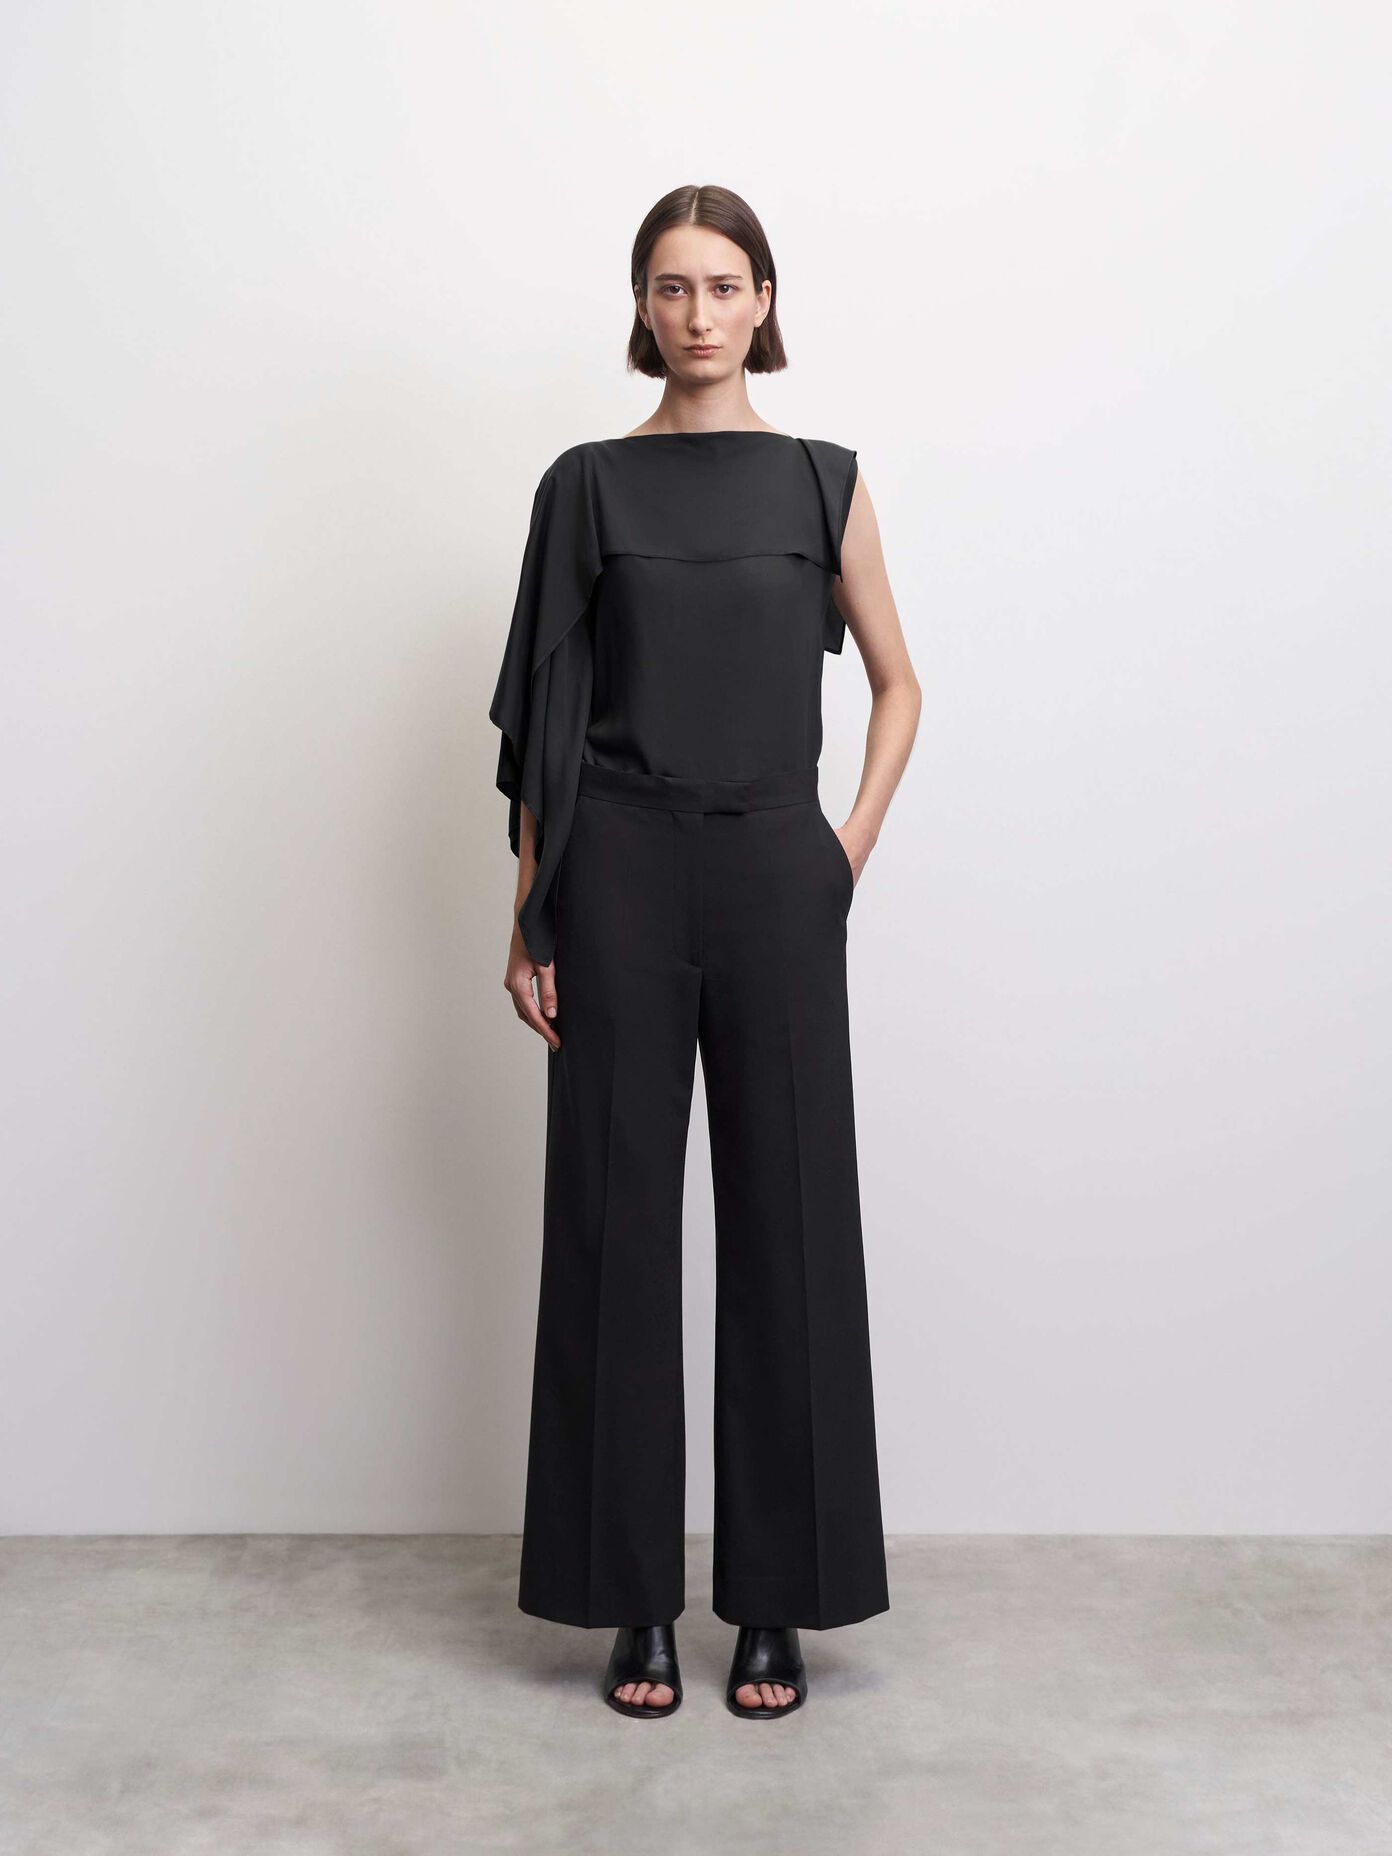 Trousers - Shop Tiger of Sweden's collection of women's trousers online